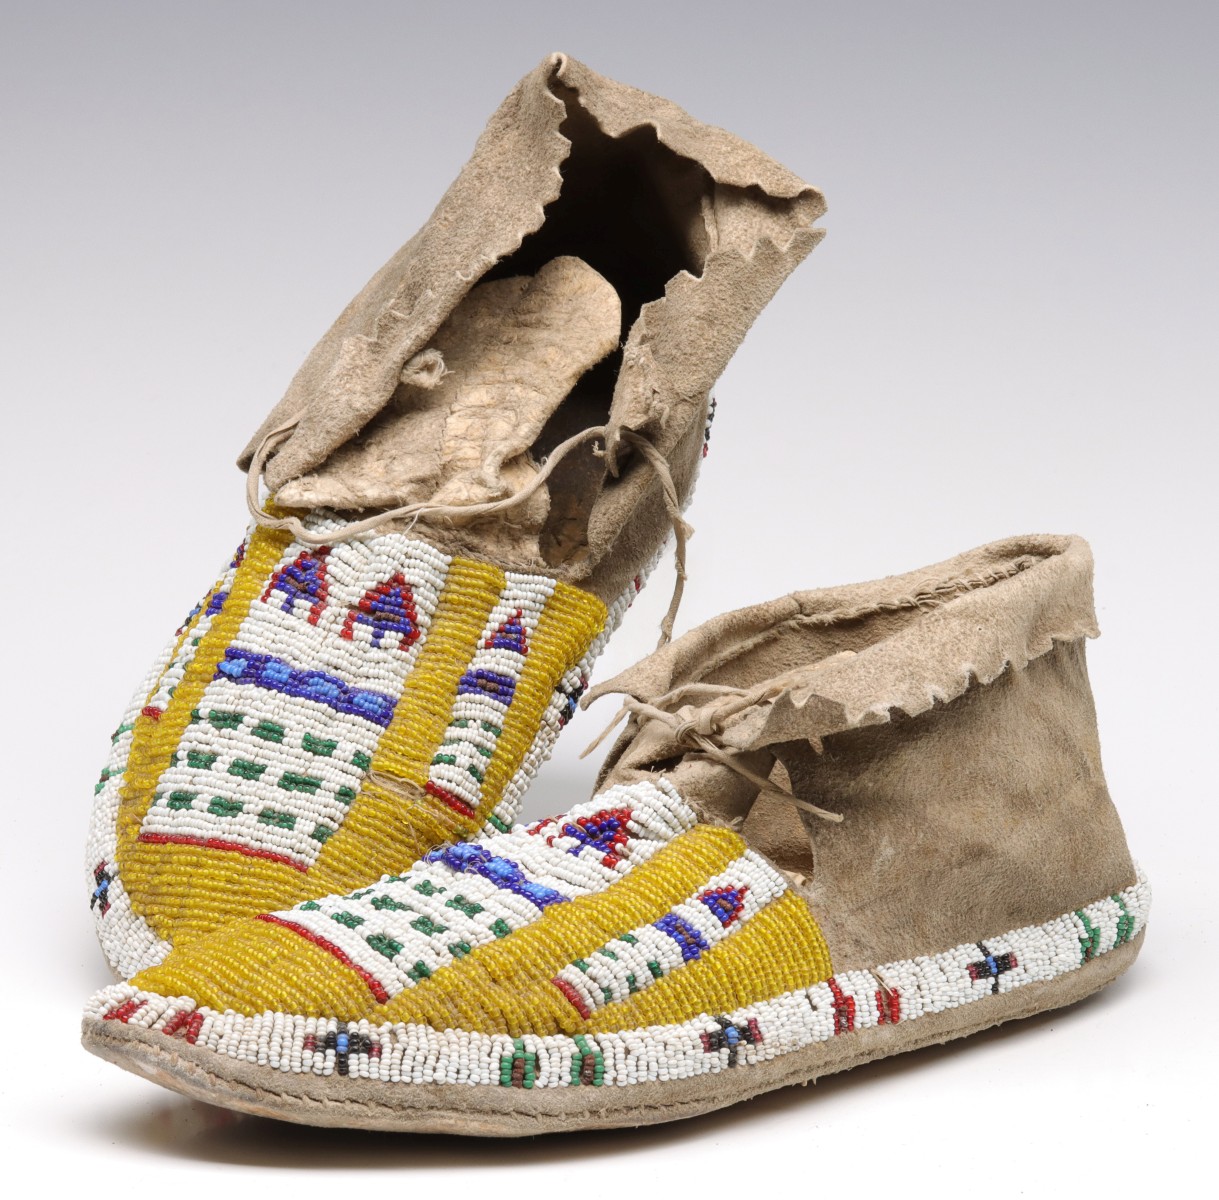 A PAIR CHEYENNE SINEW-SEWN MOCCASINS WITH YELLOW GROUND